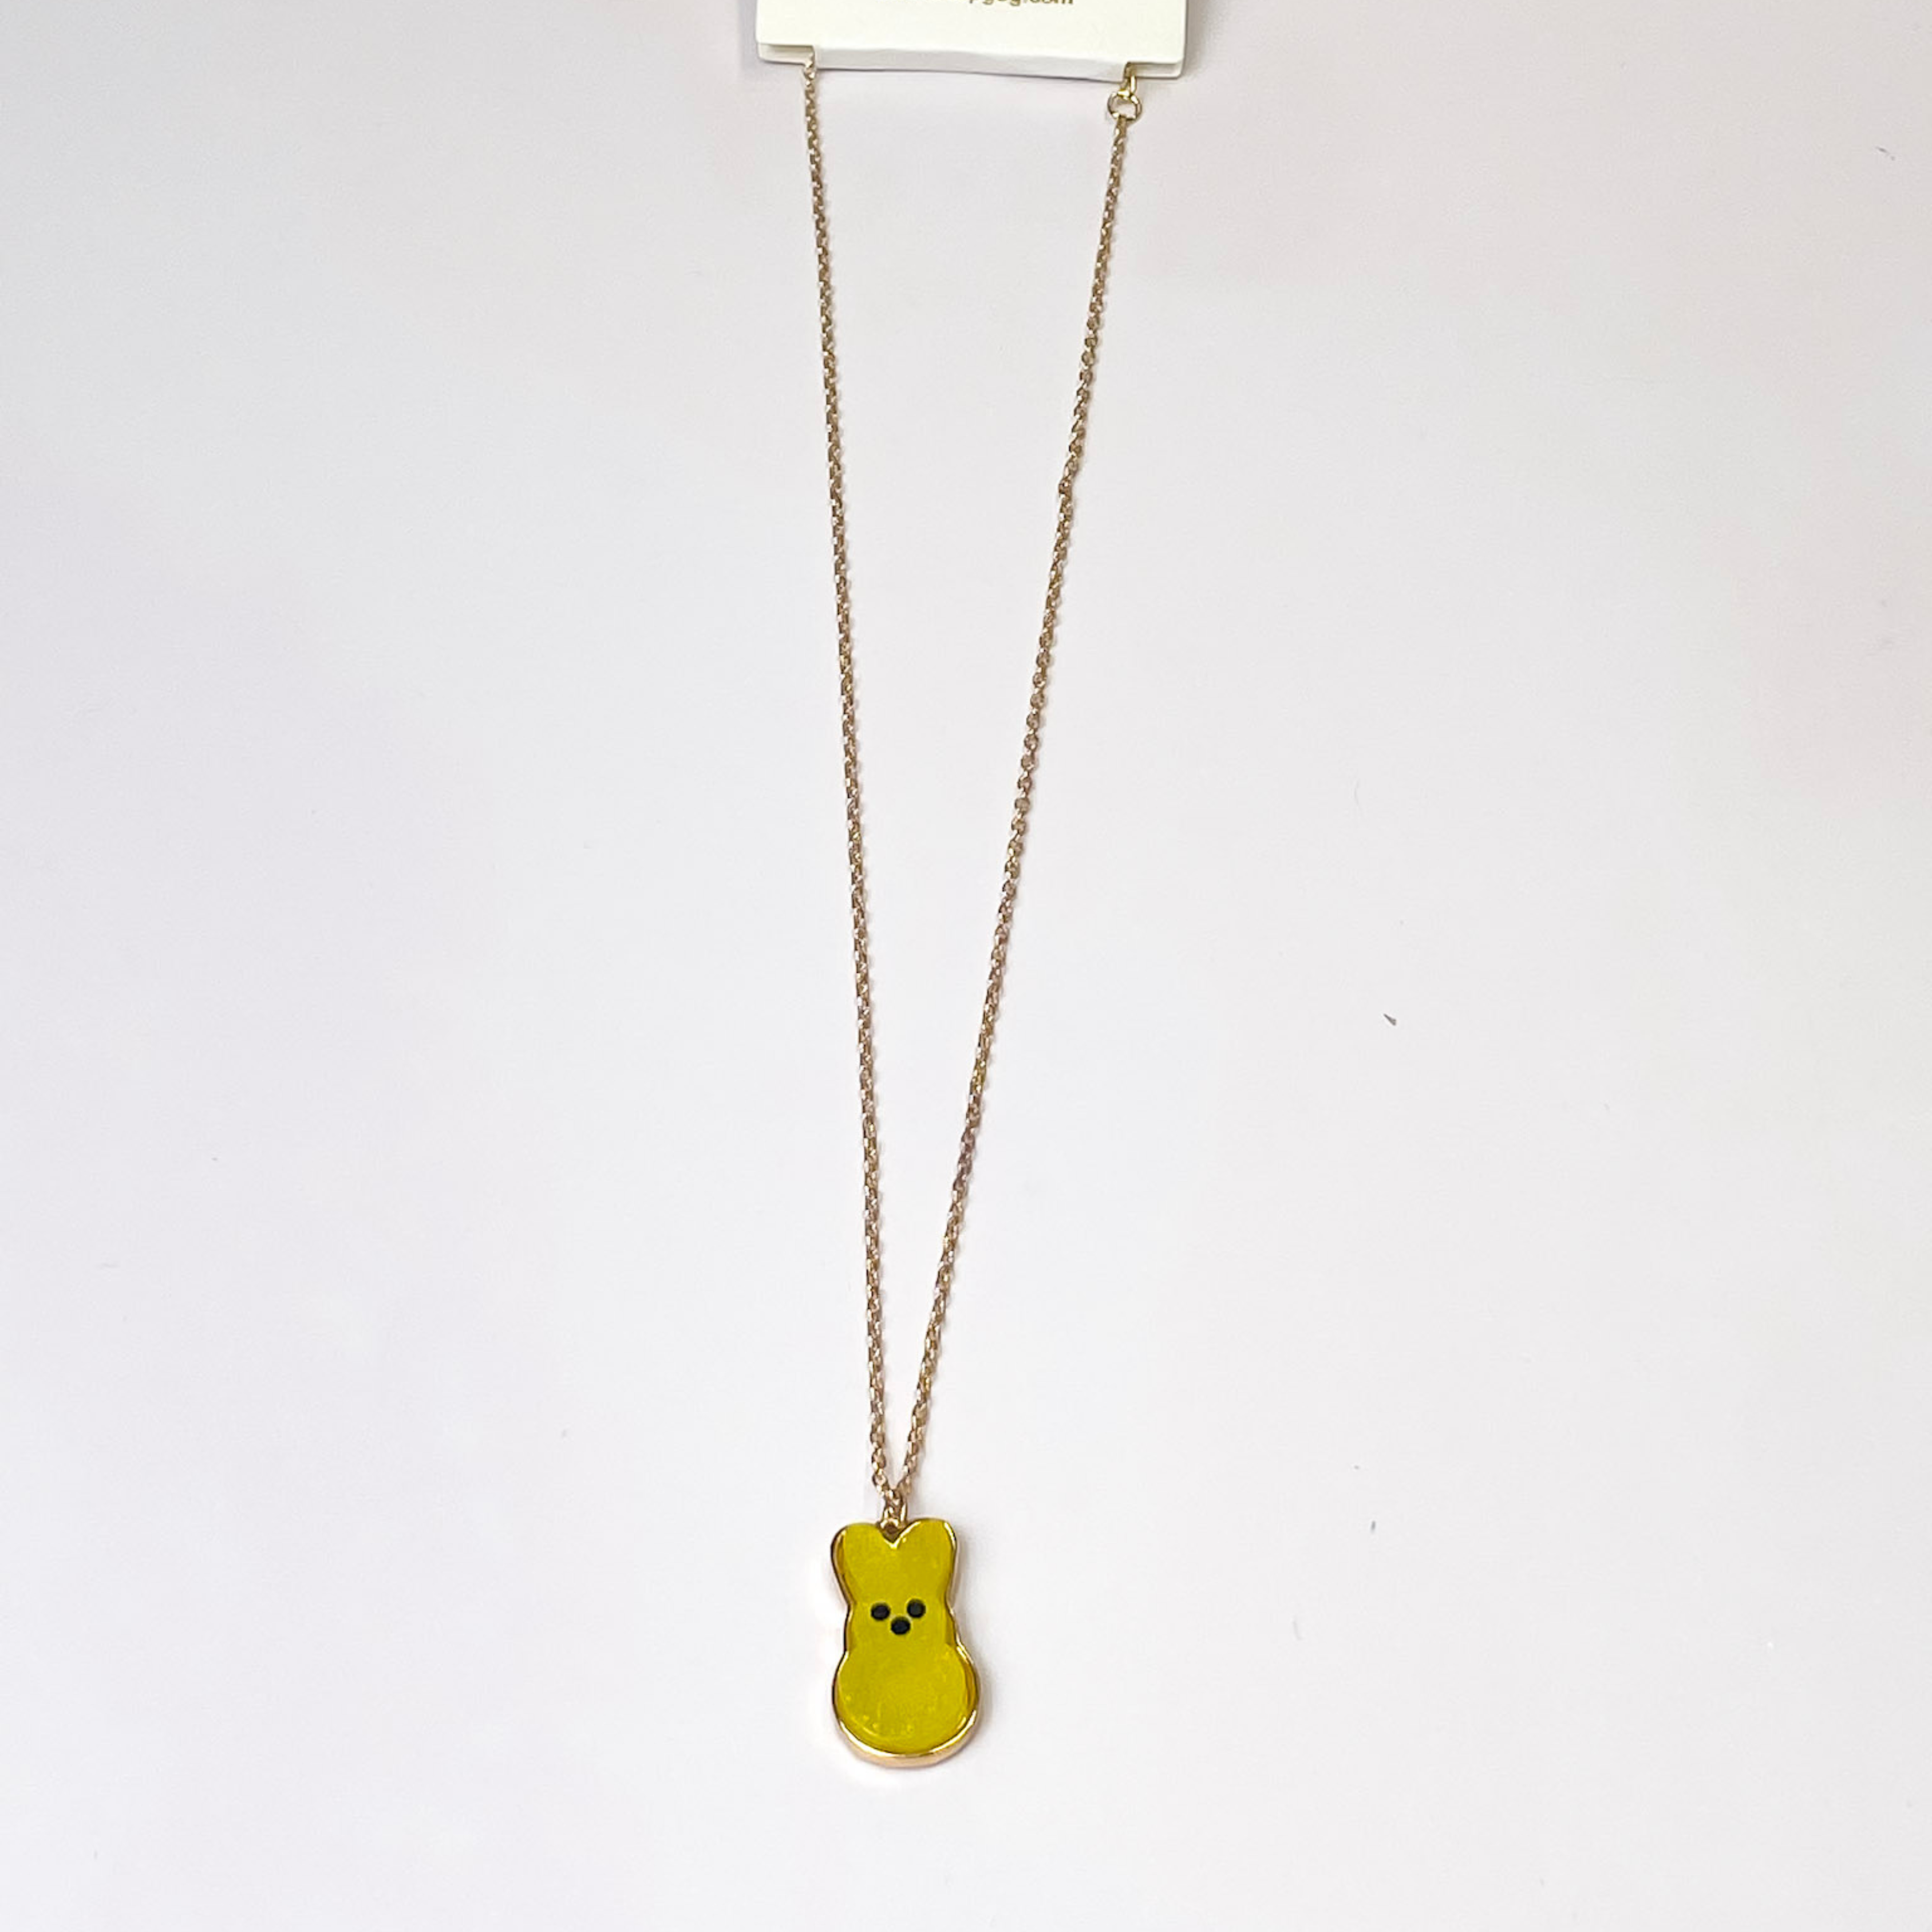 Gold Chain Necklace with Bunny Pendant in Yellow - Giddy Up Glamour Boutique